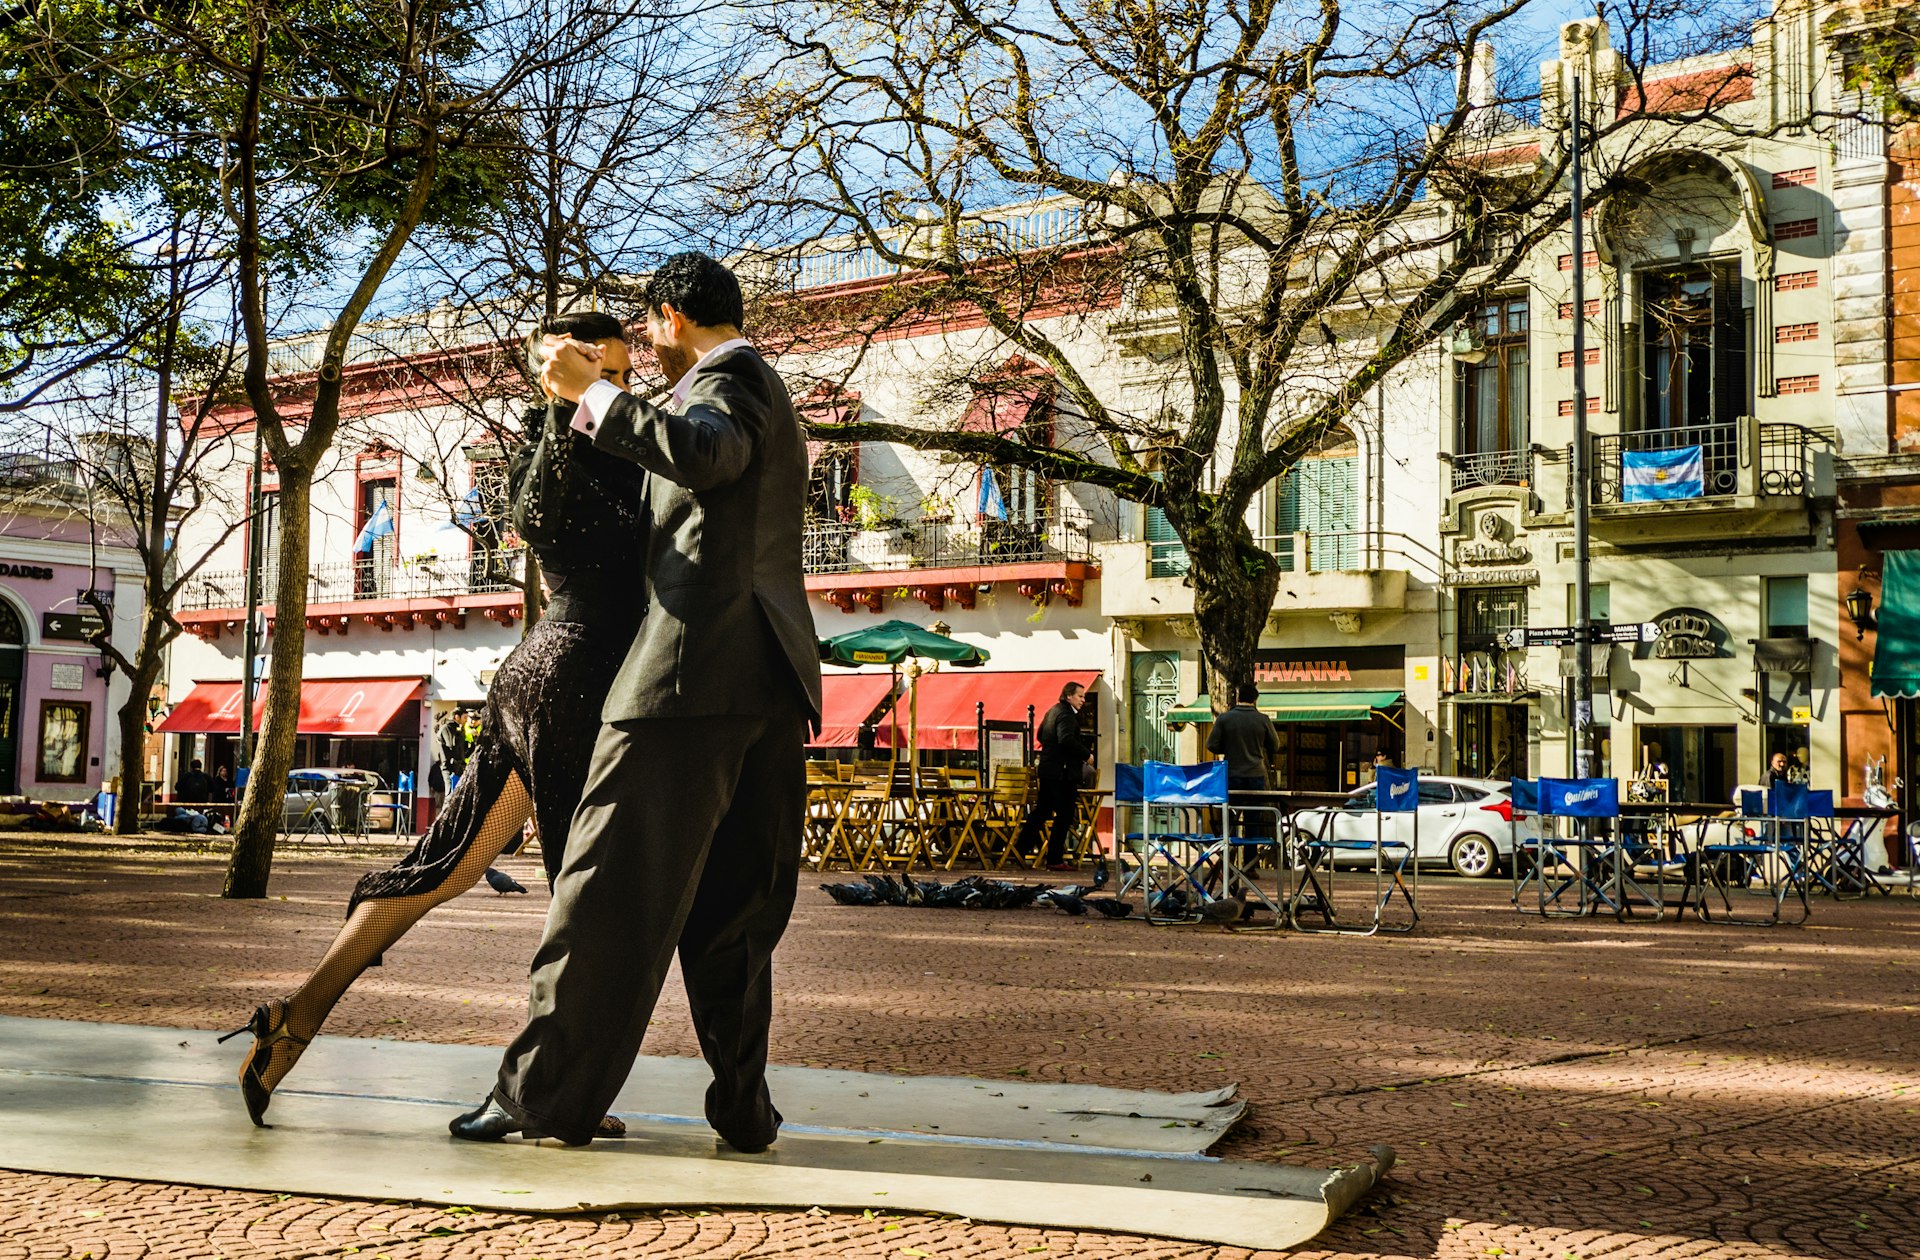 Two tango dancers performing at Plaza Serrano in San Telmo neighborhood of Buenos Aires